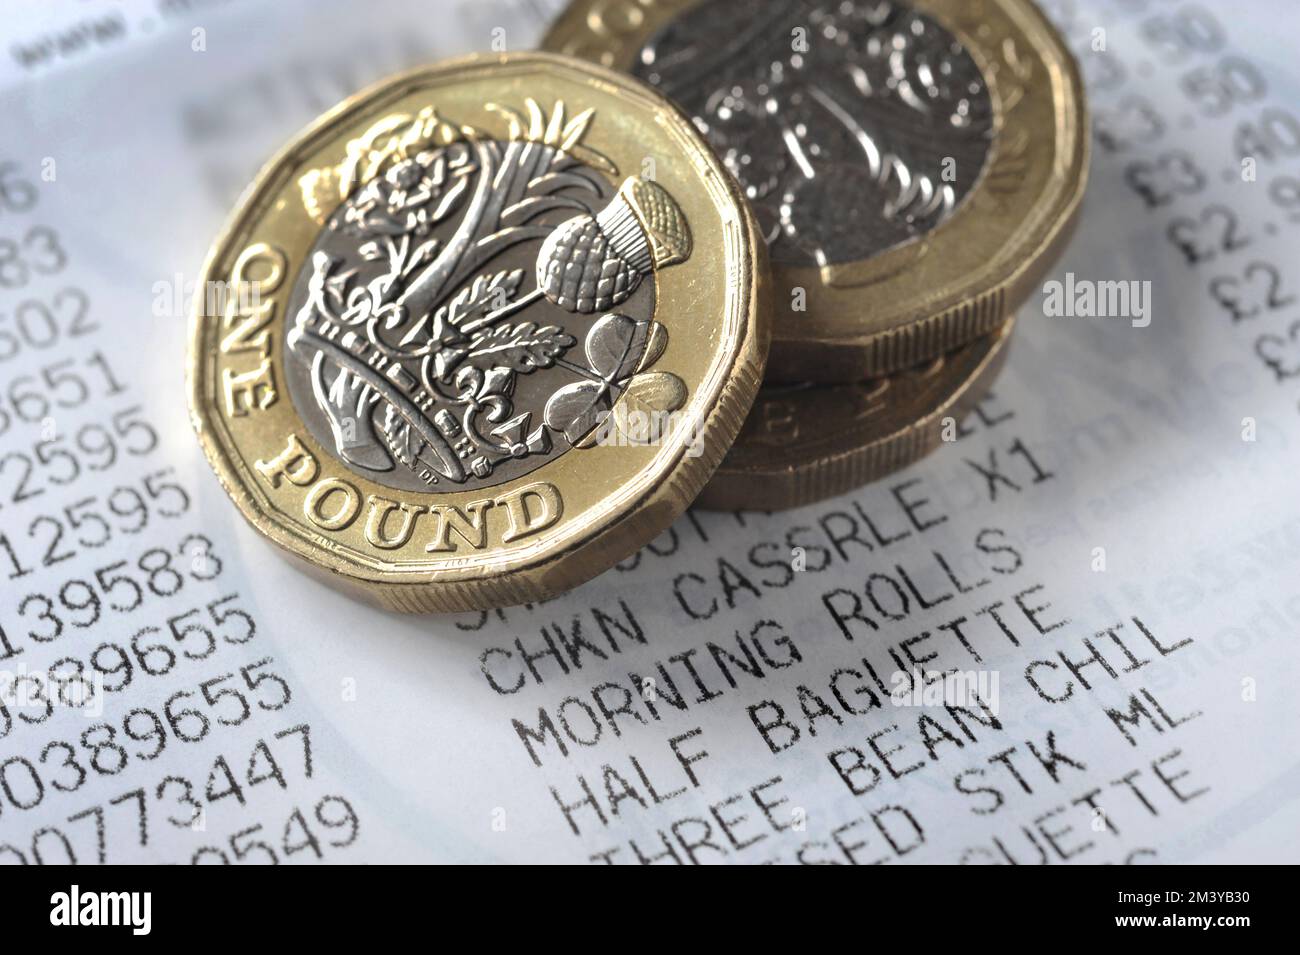 FOOD SHOPPING RECEIPT WITH ONE POUND COINS RE COST OF LIVING CRISIS RISING PRICES INFLATION HOUSEHOLD BUDGETS ETC UK Stock Photo